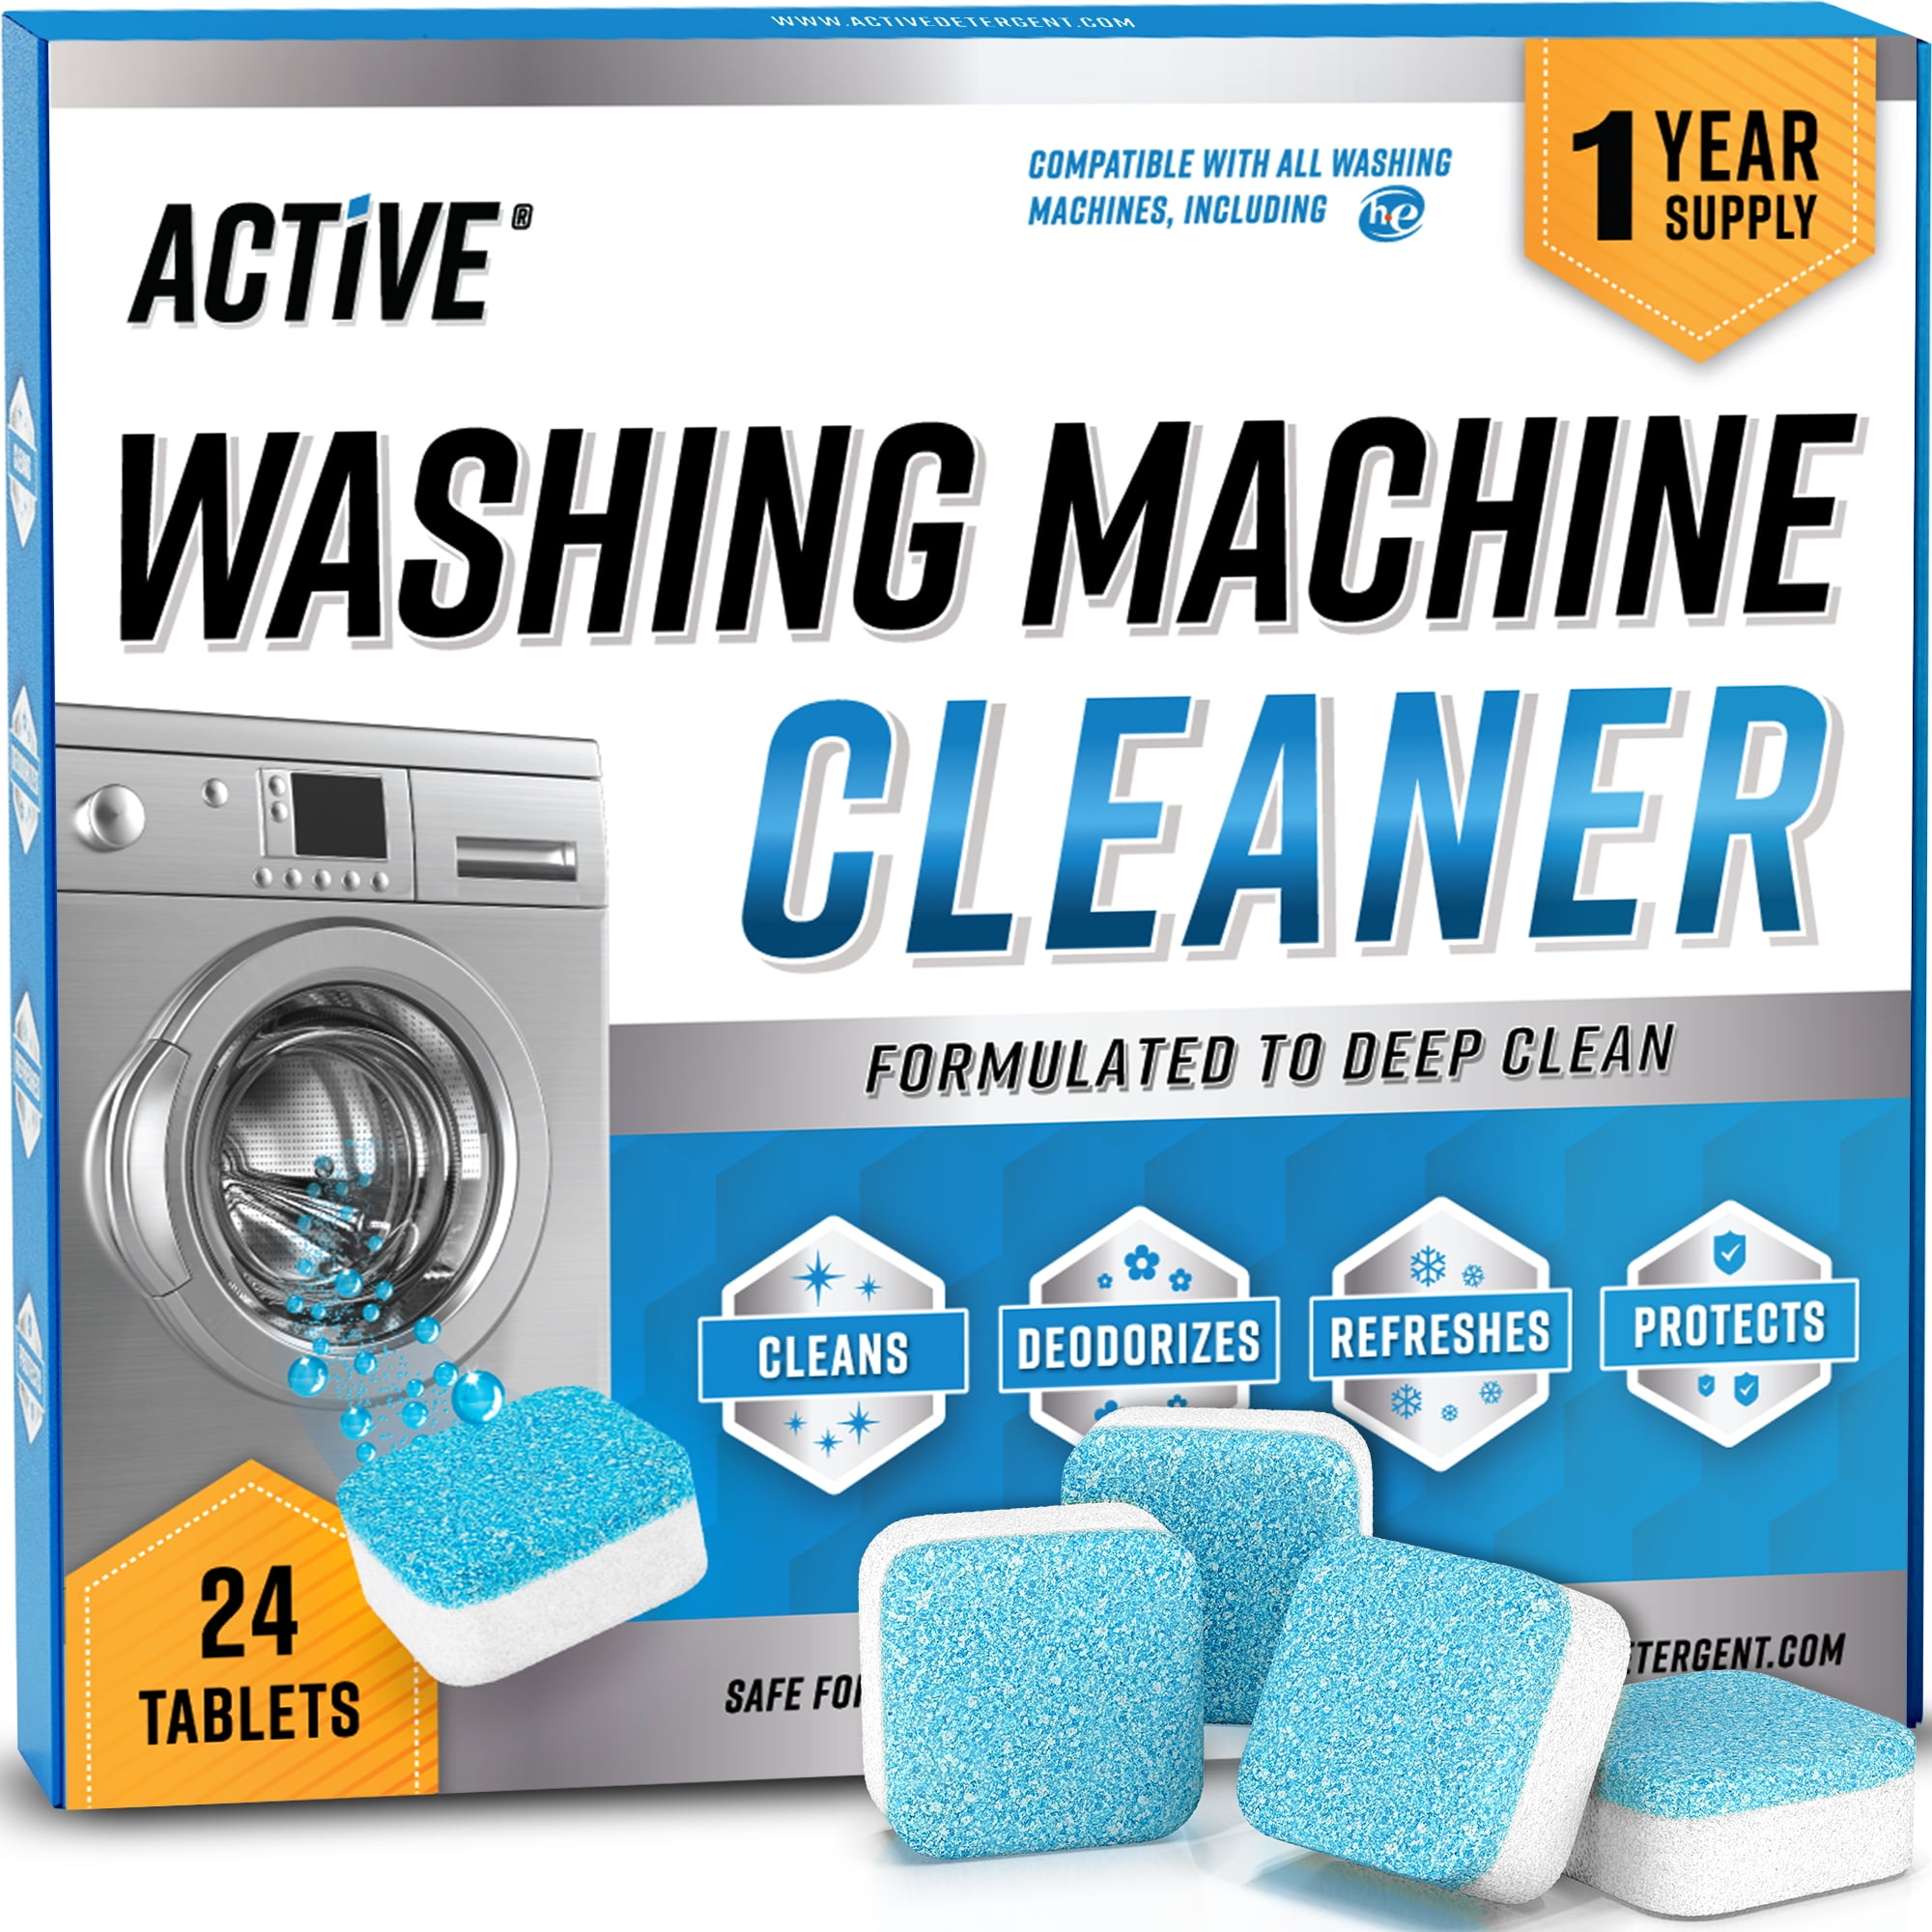 Top 10 Best Washing Machine Removal near you